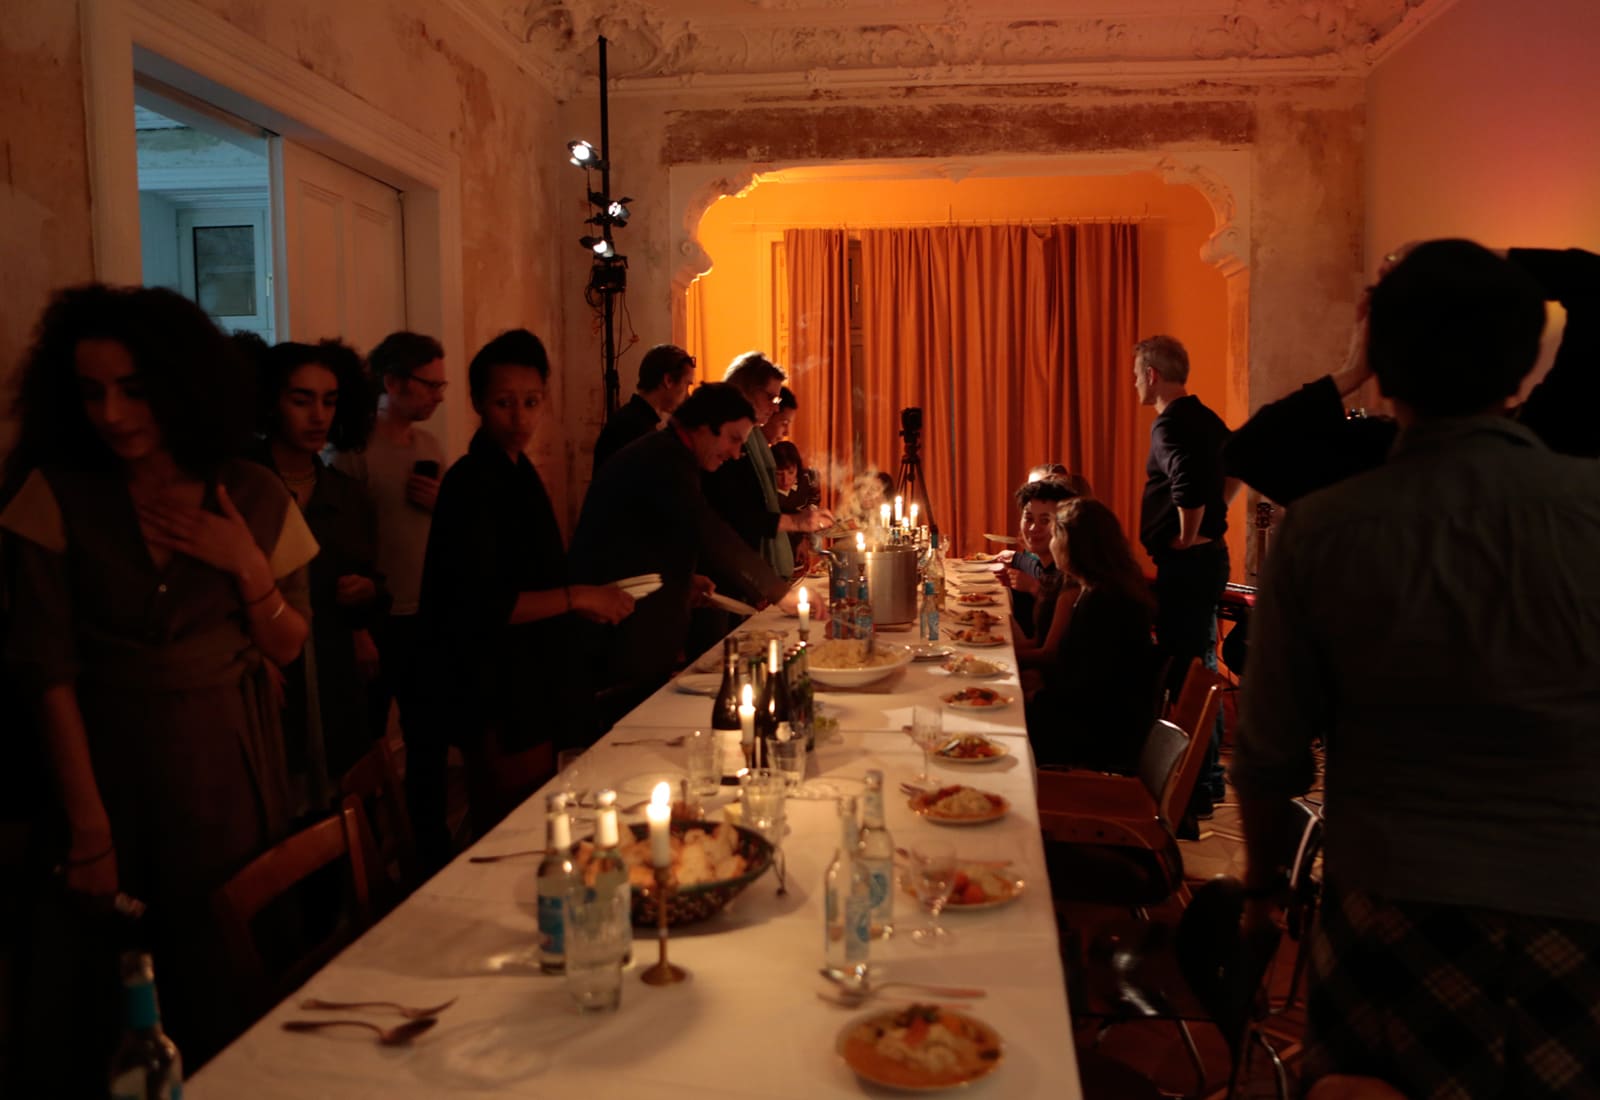 Dinner table in the M.Bassy rooms. Many people are standing around the table and talking.